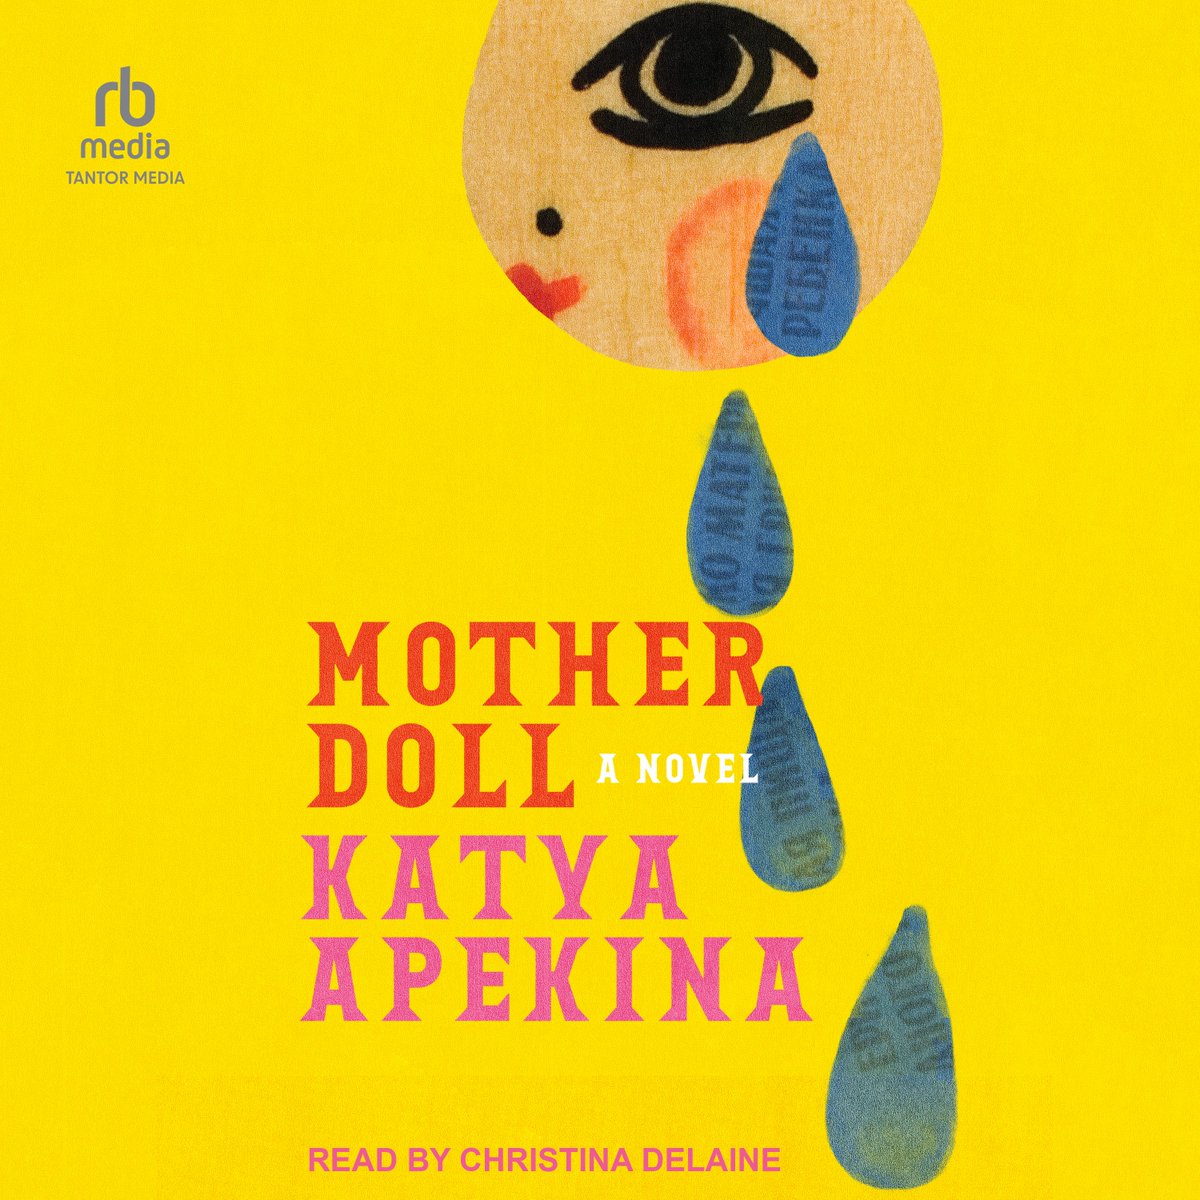 '[A] provocative vision of a world in which past and present are not as neatly separated as they appear.' (@PublishersWkly ) ⭐️ 🎧tantor.com/mother-doll-ka… performed by @ChrisDelaine #newrelease #audiobook #literaryfiction @katyaapekina